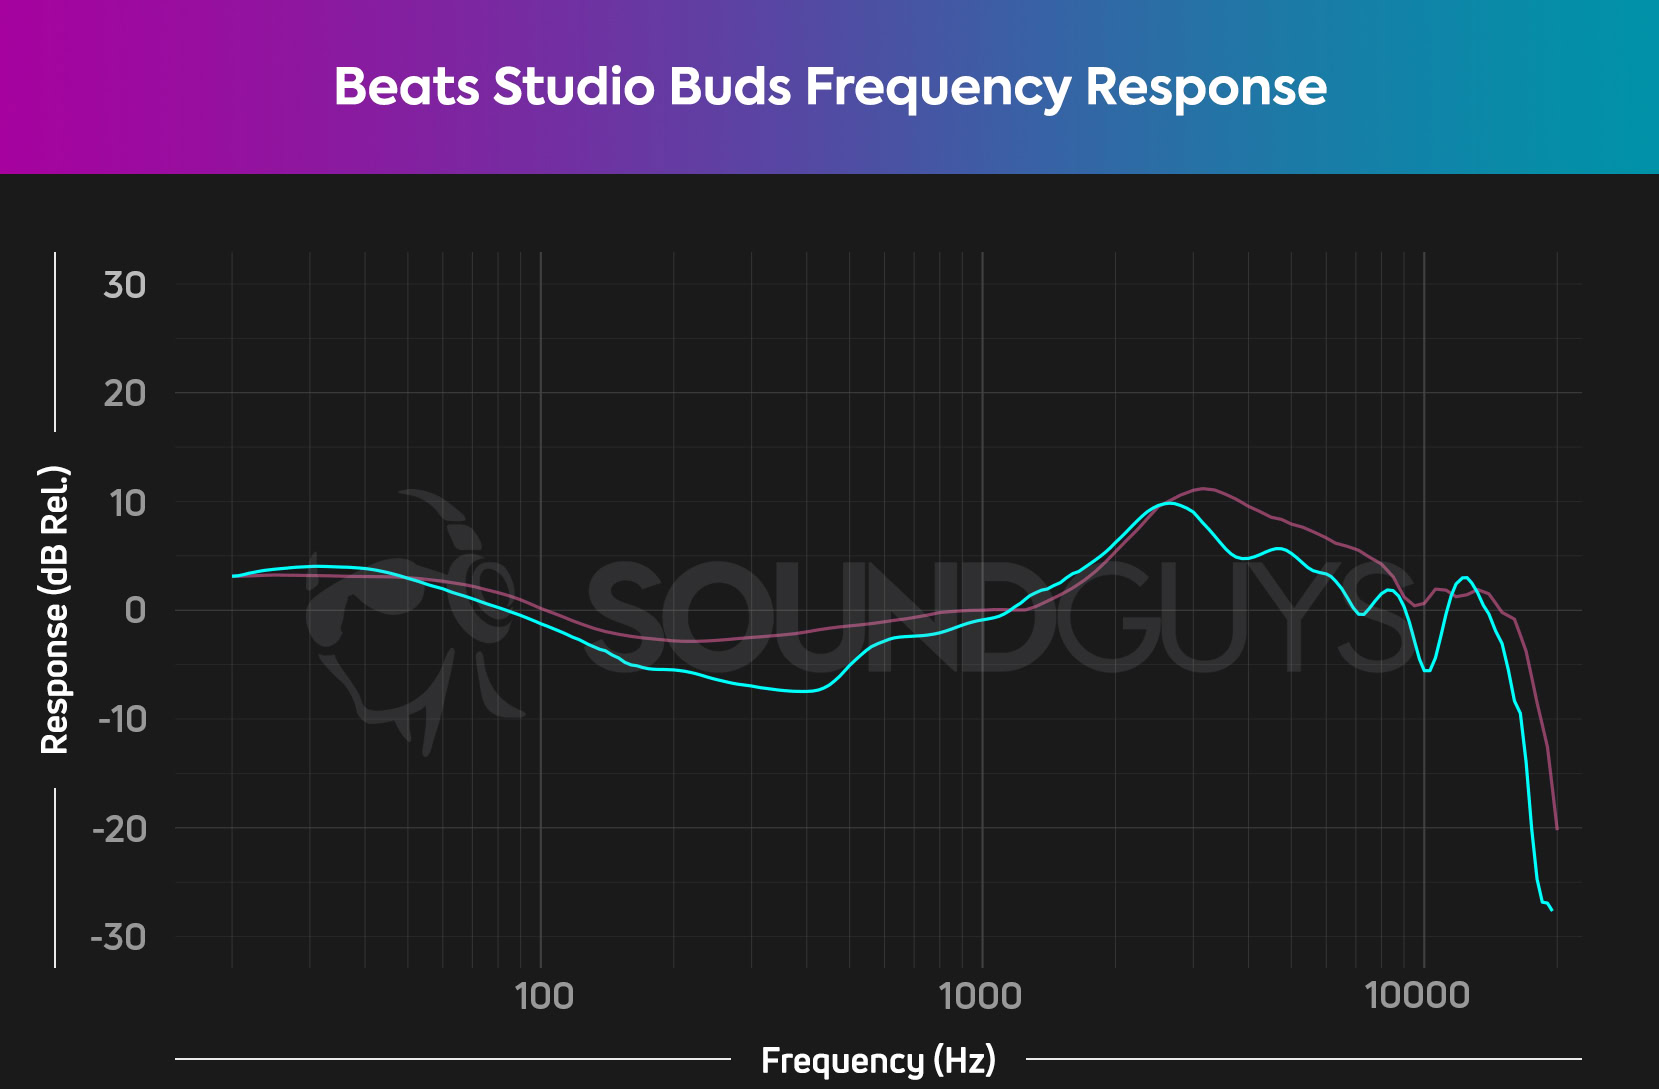 Frequency response chart of Beats Studio Buds noise-canceling true wireless headphones, depicting amplified bass and treble notes.